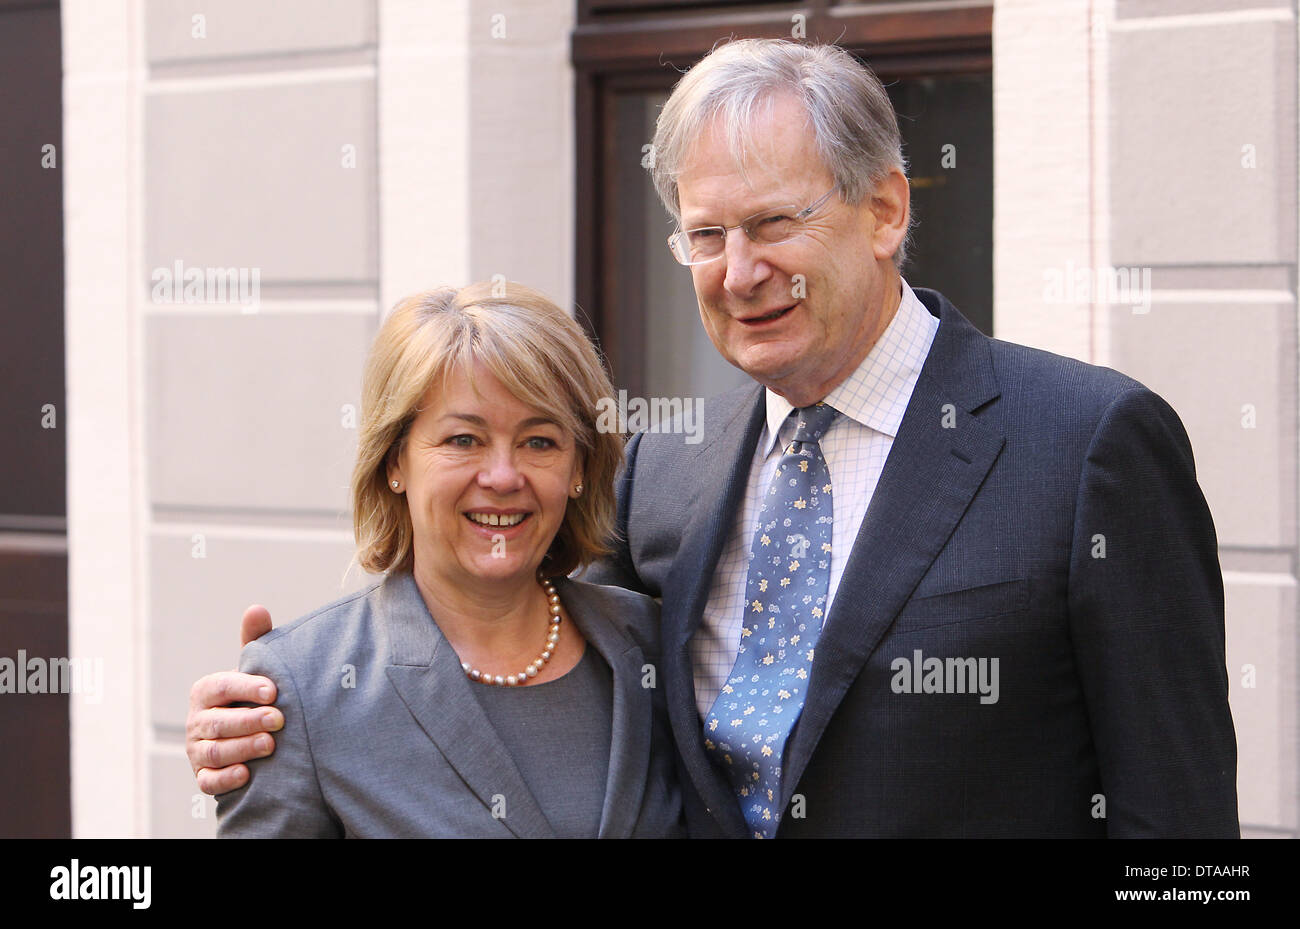 Leipzig, Germany. 13th Feb, 2014. British conductor Sir John Eliot Gardiner  and his wife Isabella pose during a press conference in the Bachmuseum in  Leipzig, Germany, 13 February 2014. The conductor, well